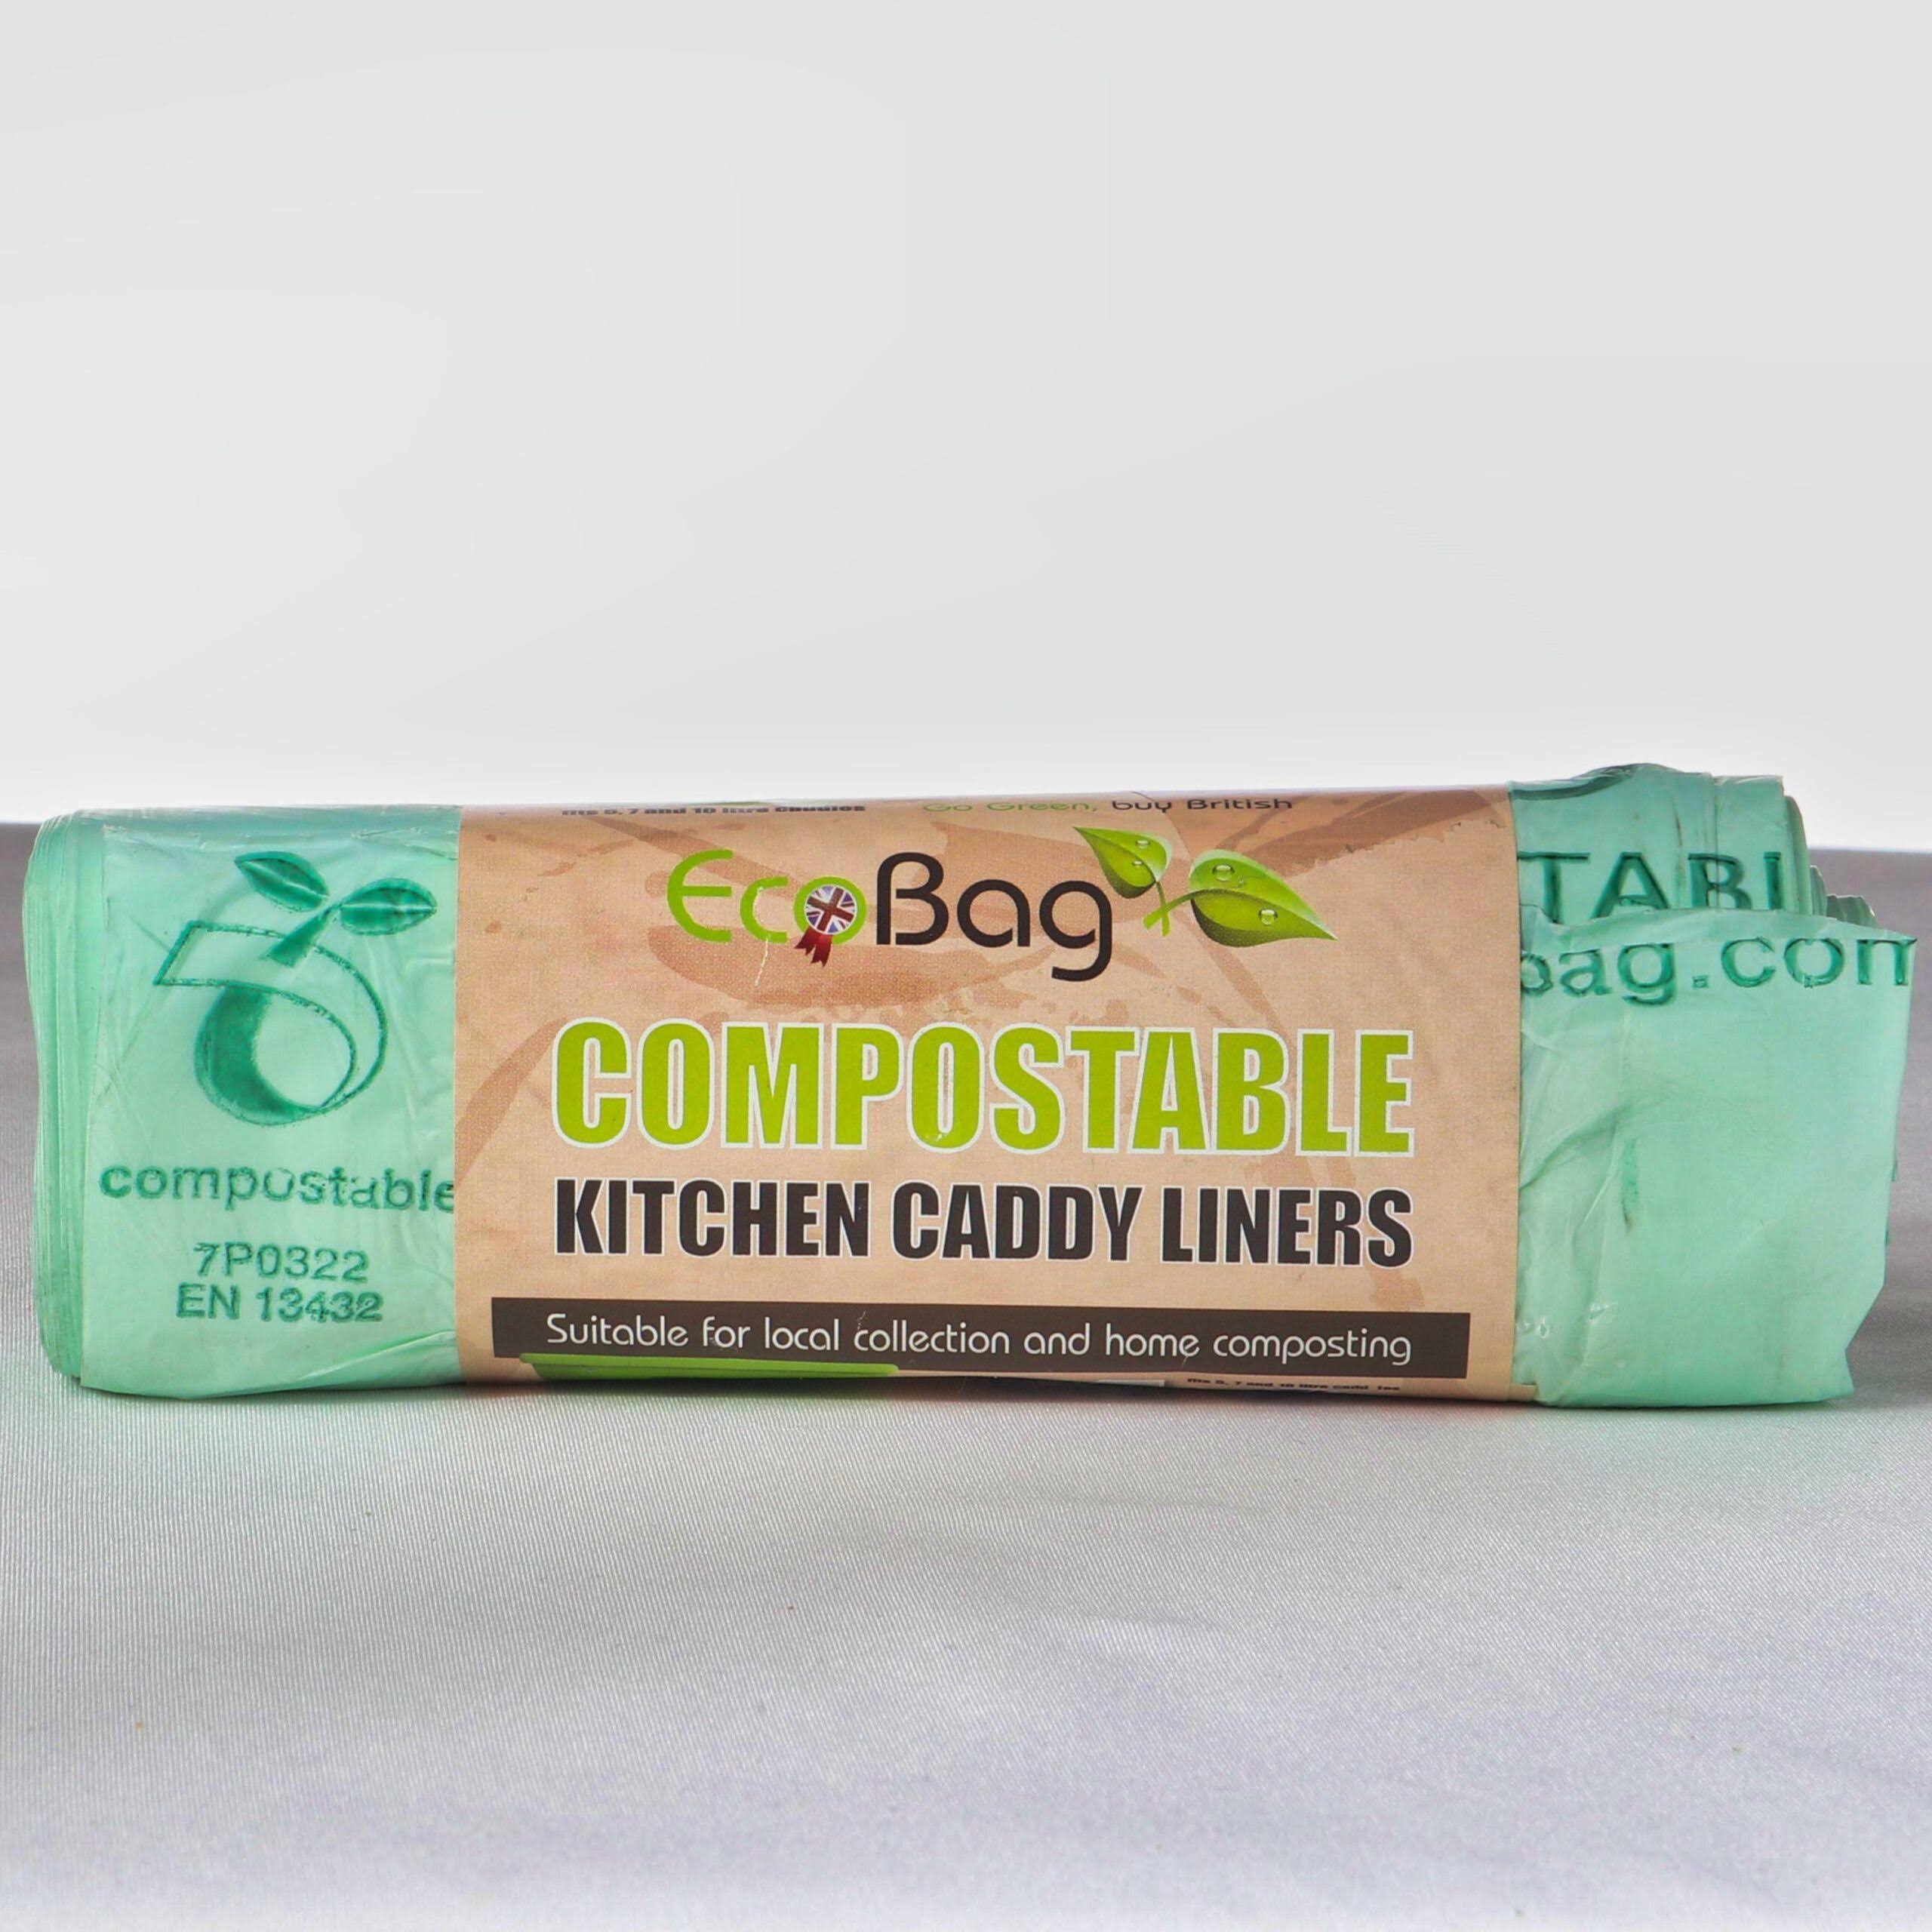 Eco Bag Compostable Caddy Liners - 24 Pack